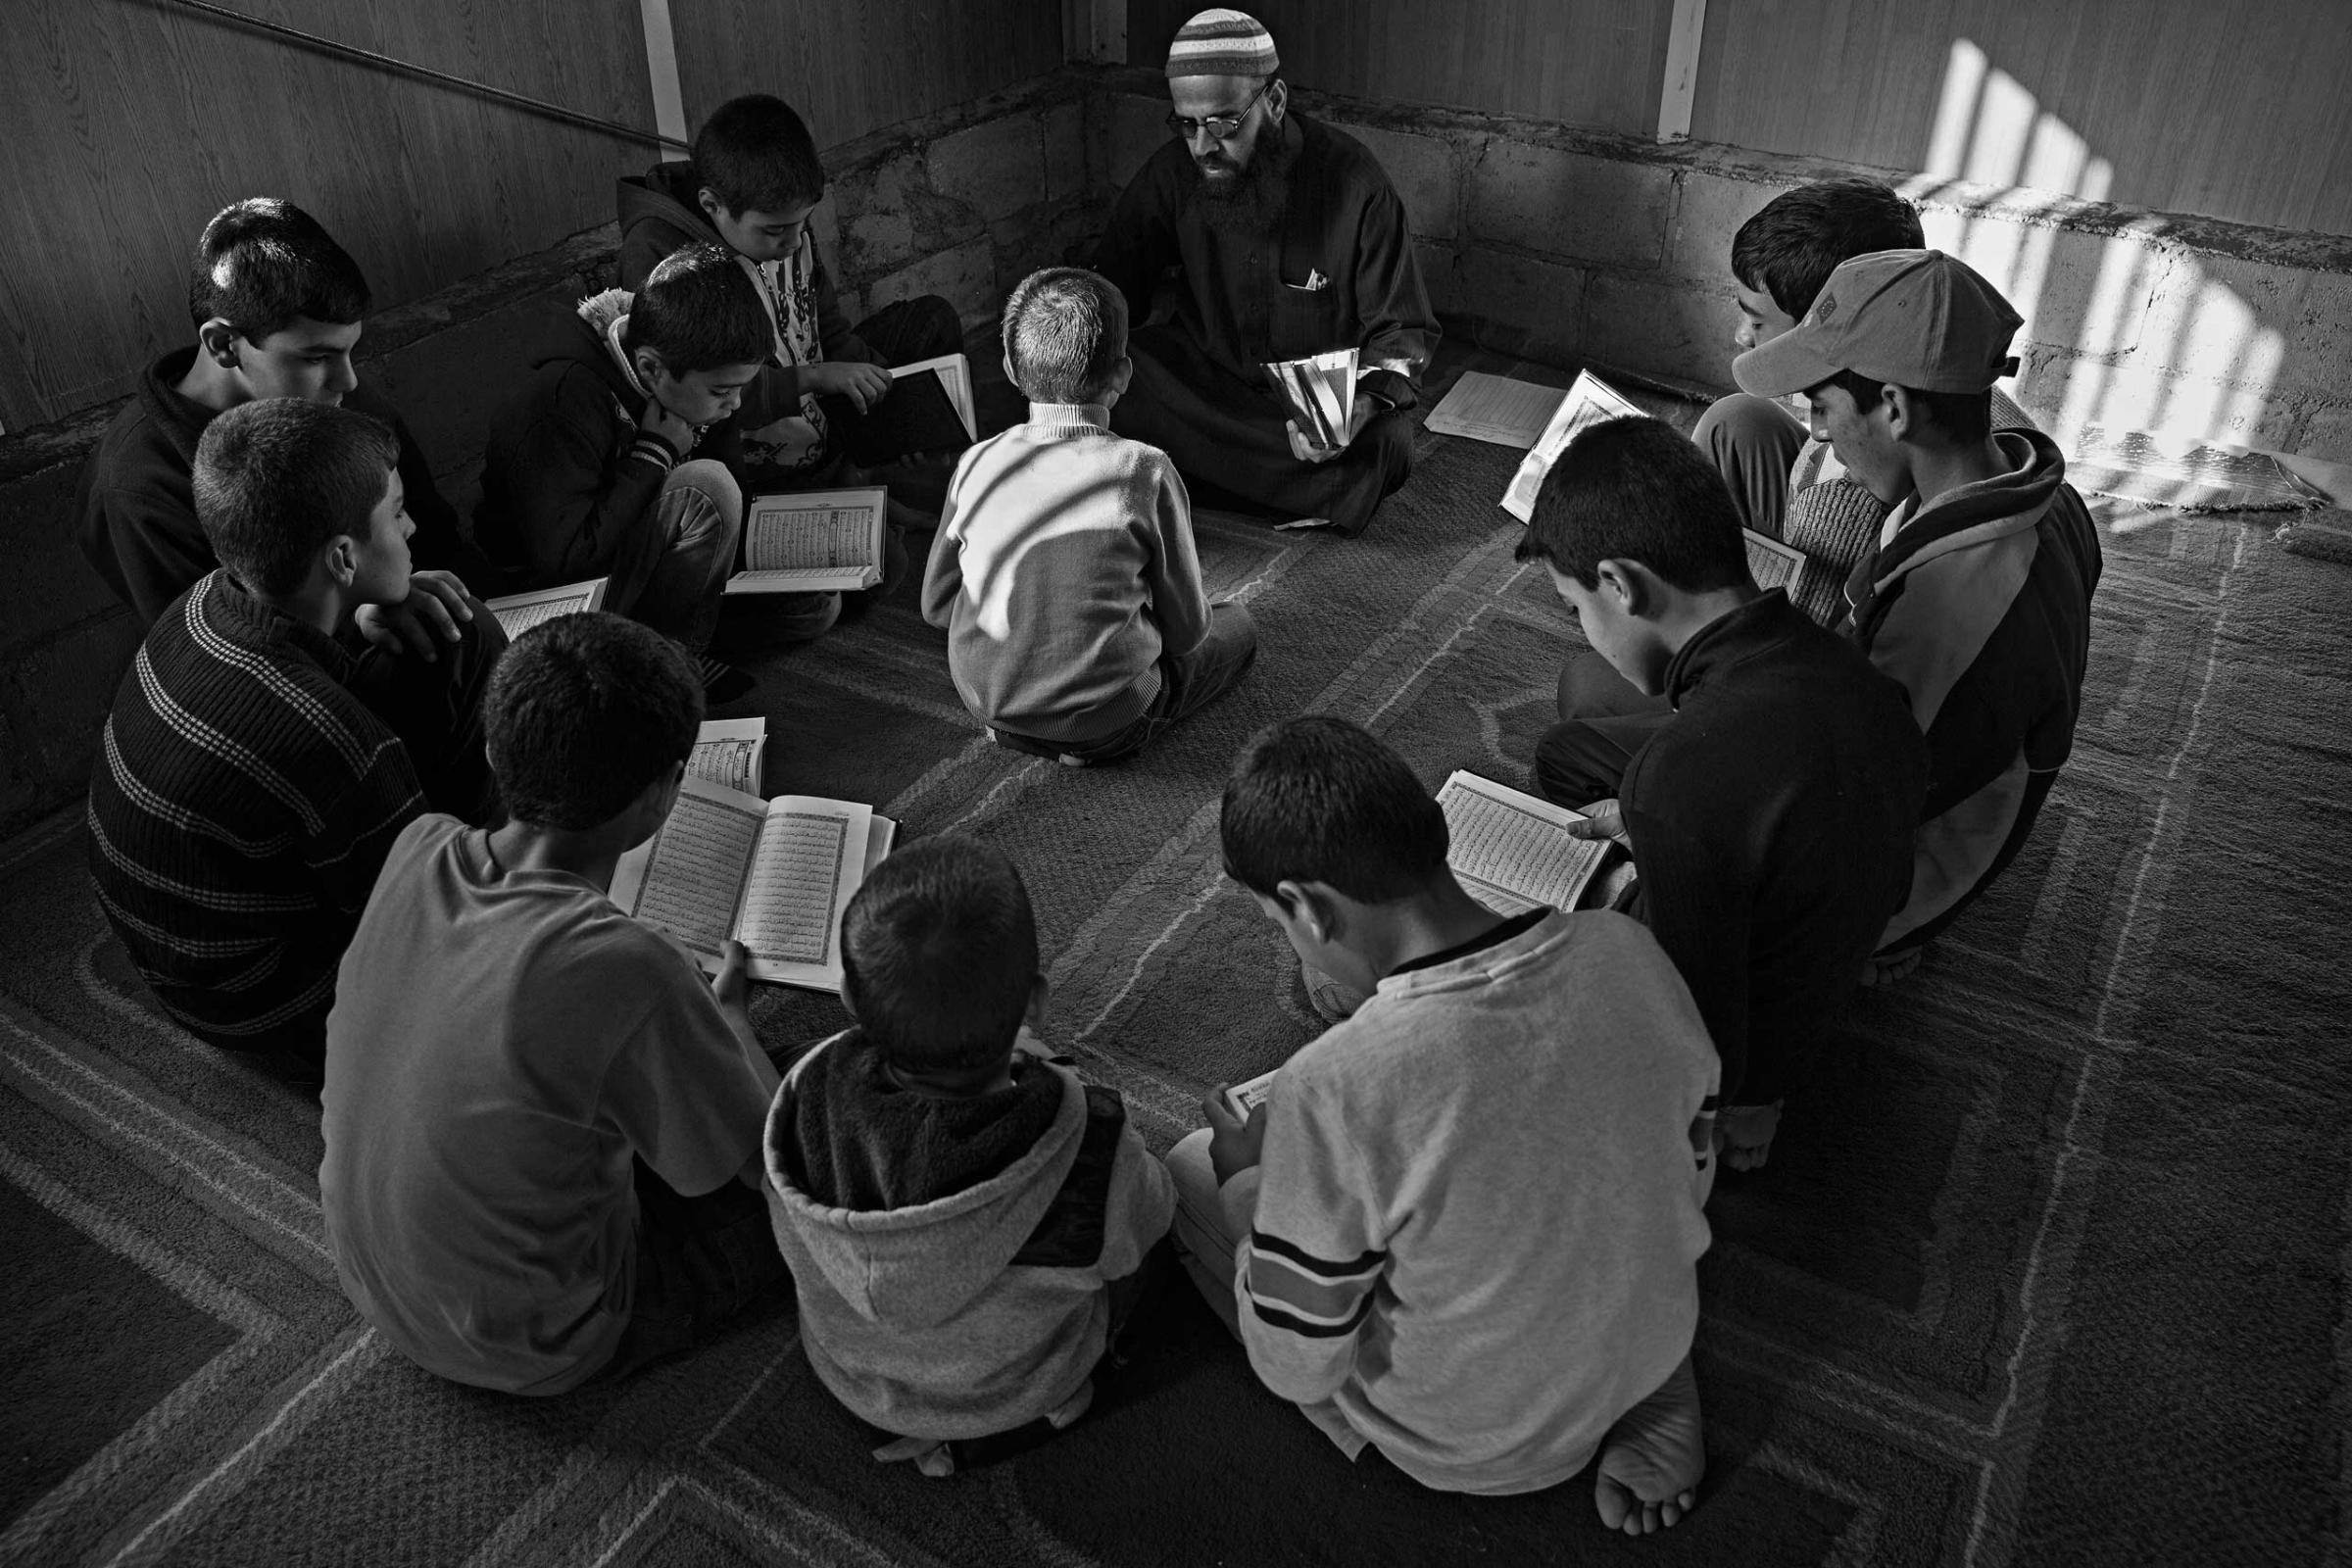 December 2013. Za'atari refugee camp, Jordan. Young boys learning the Koran during daily classes in a mosque.